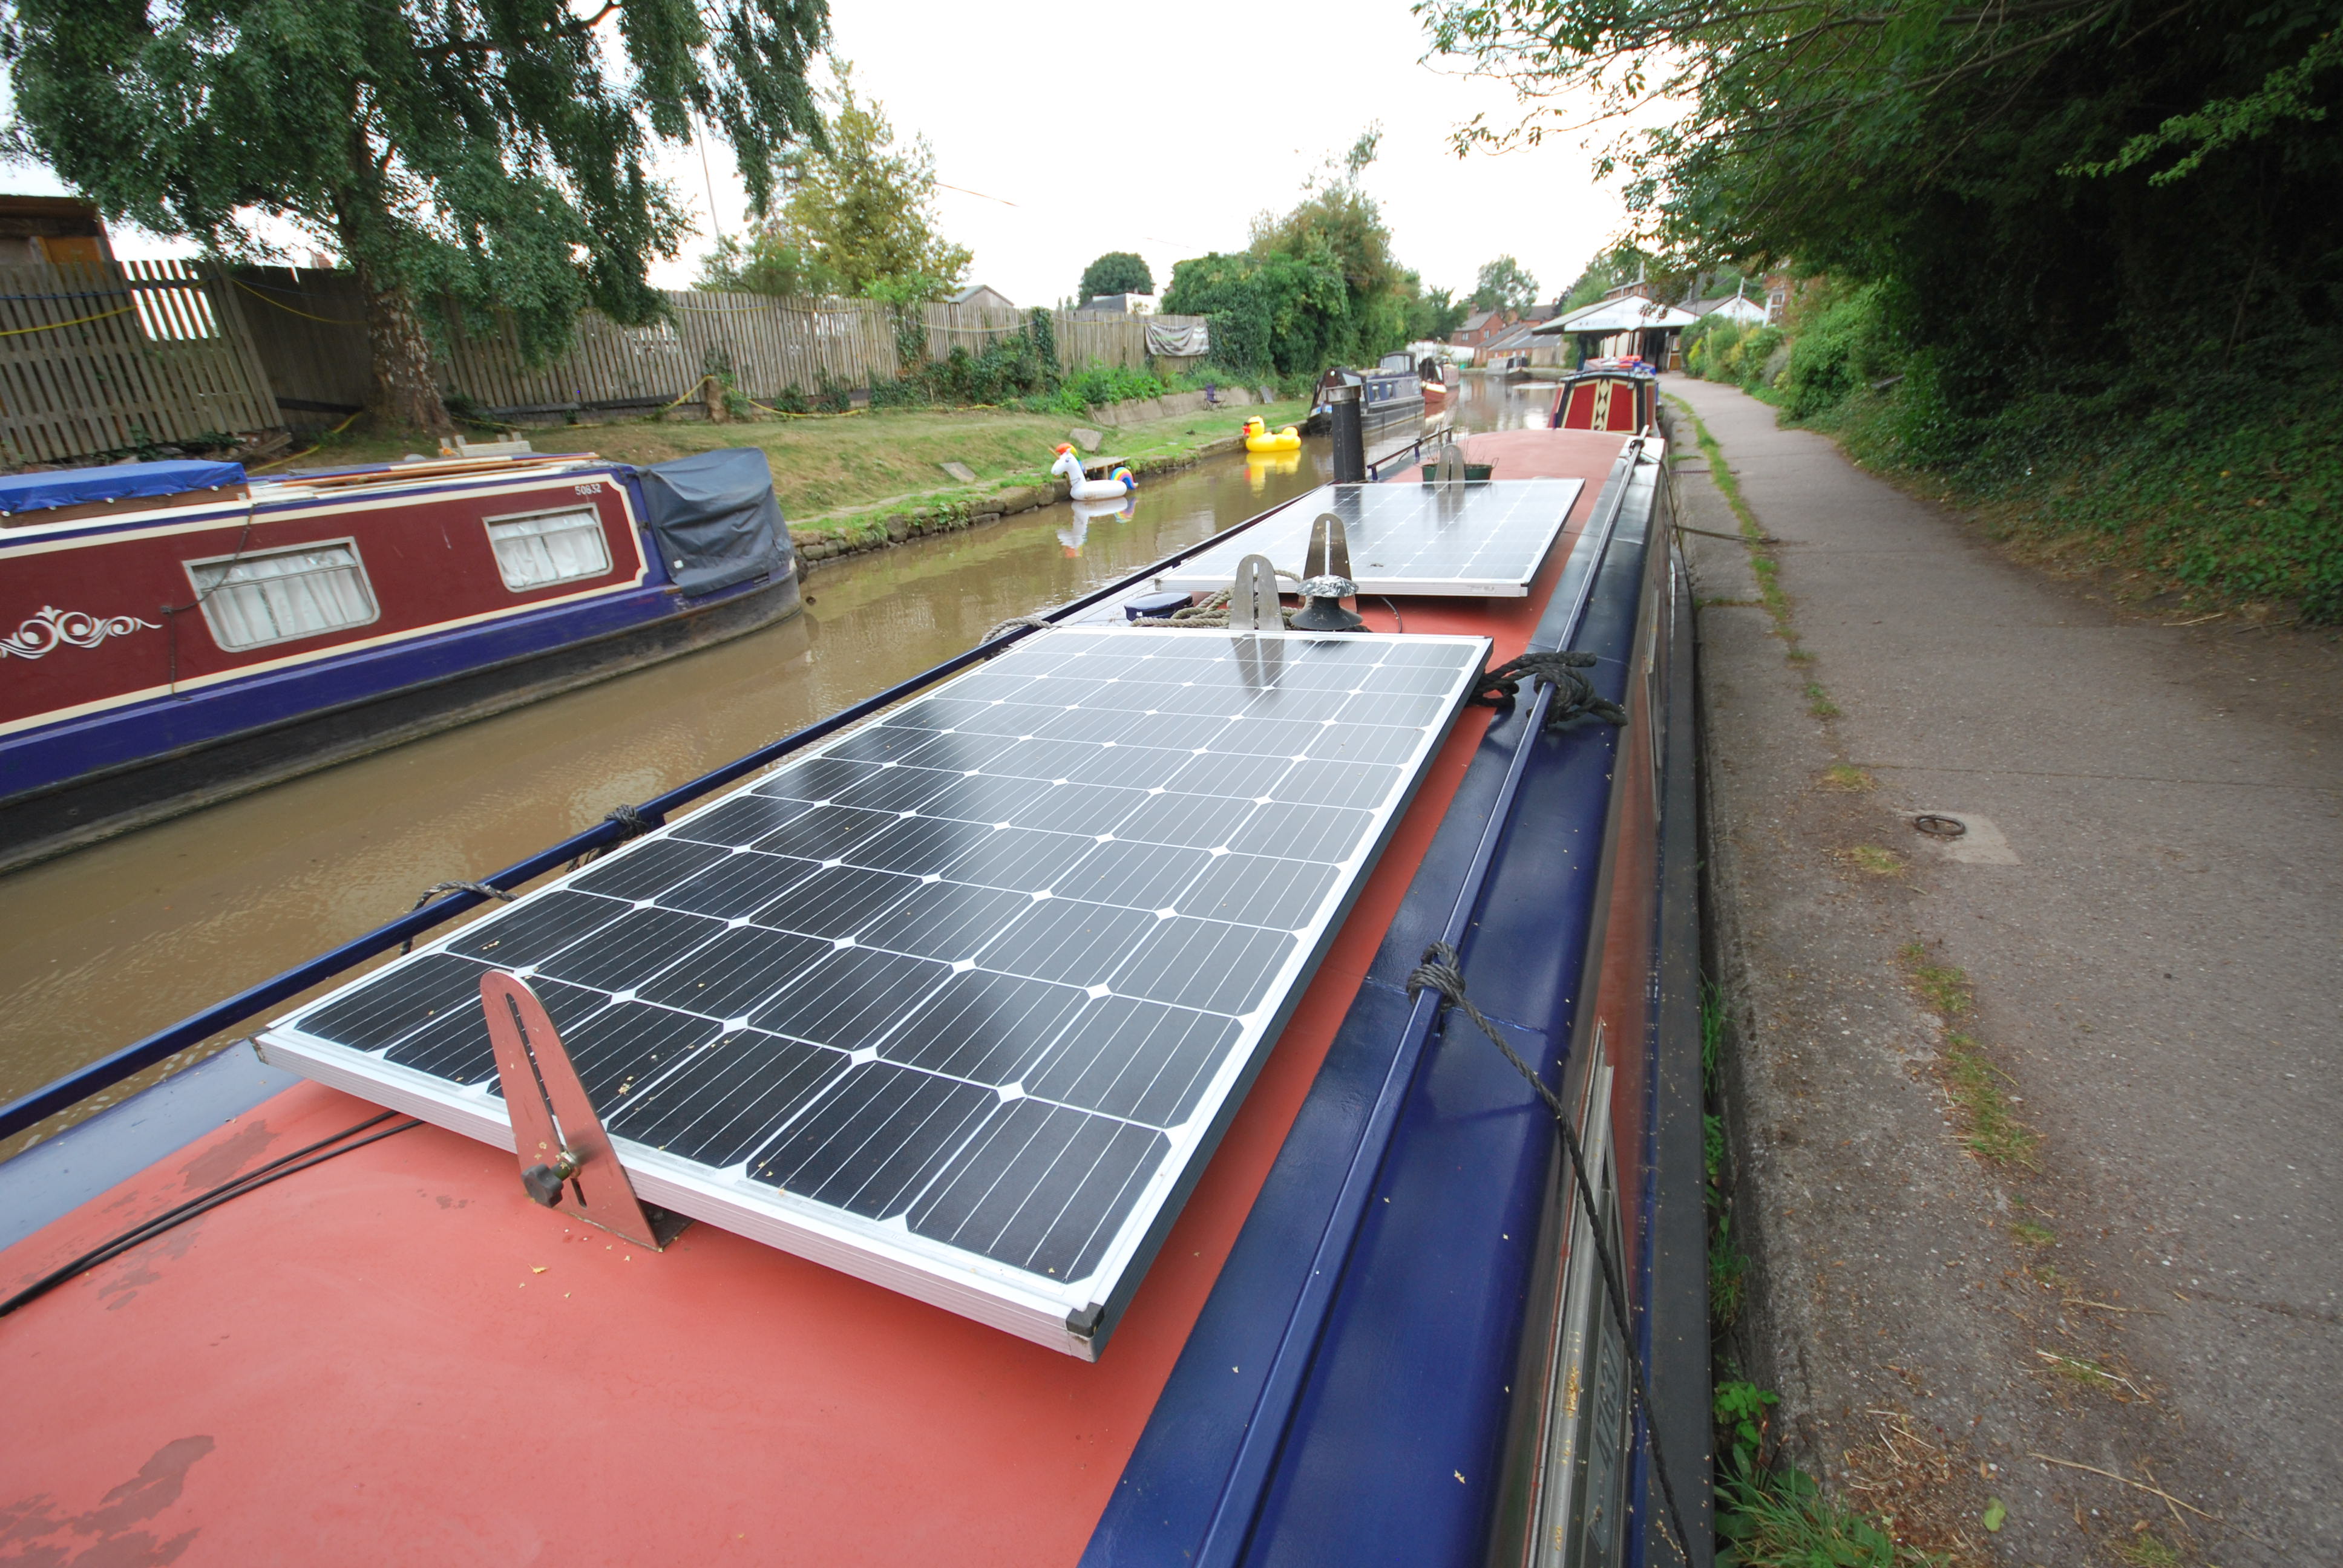 Luvly Jubbly - 56ft Cruiser Stern Liveaboard Narrowboat - For Sale 8